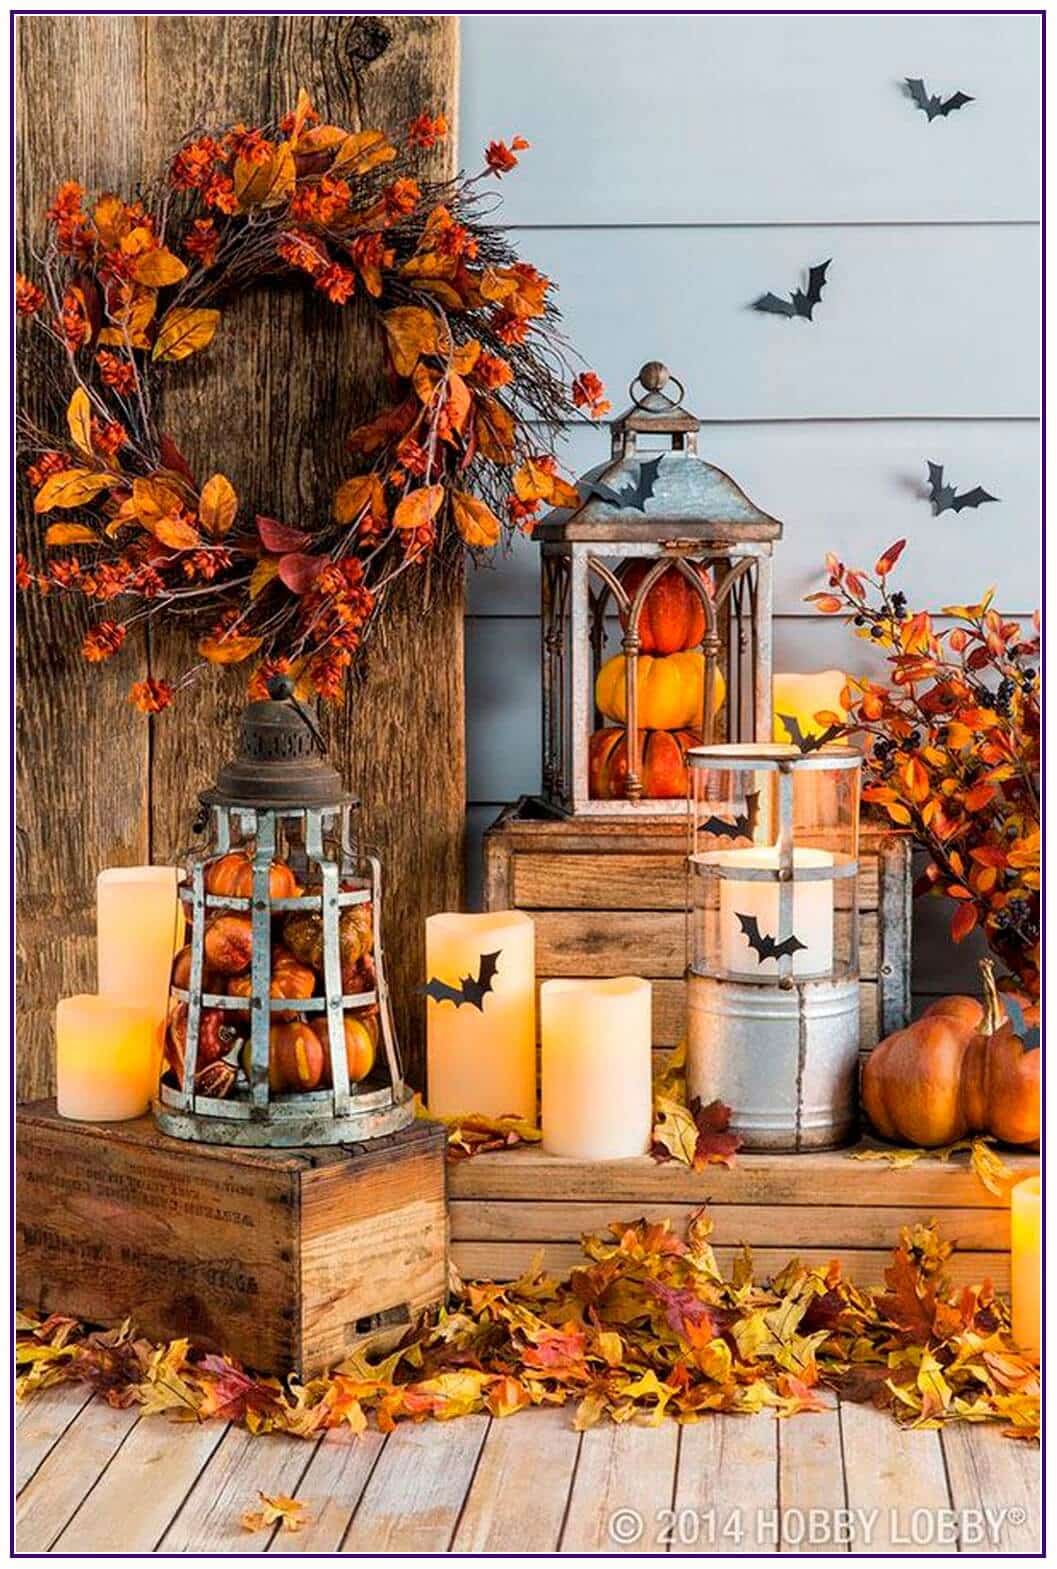 Best Fall Decorating Ideas For Outside - Fall Decorations Images